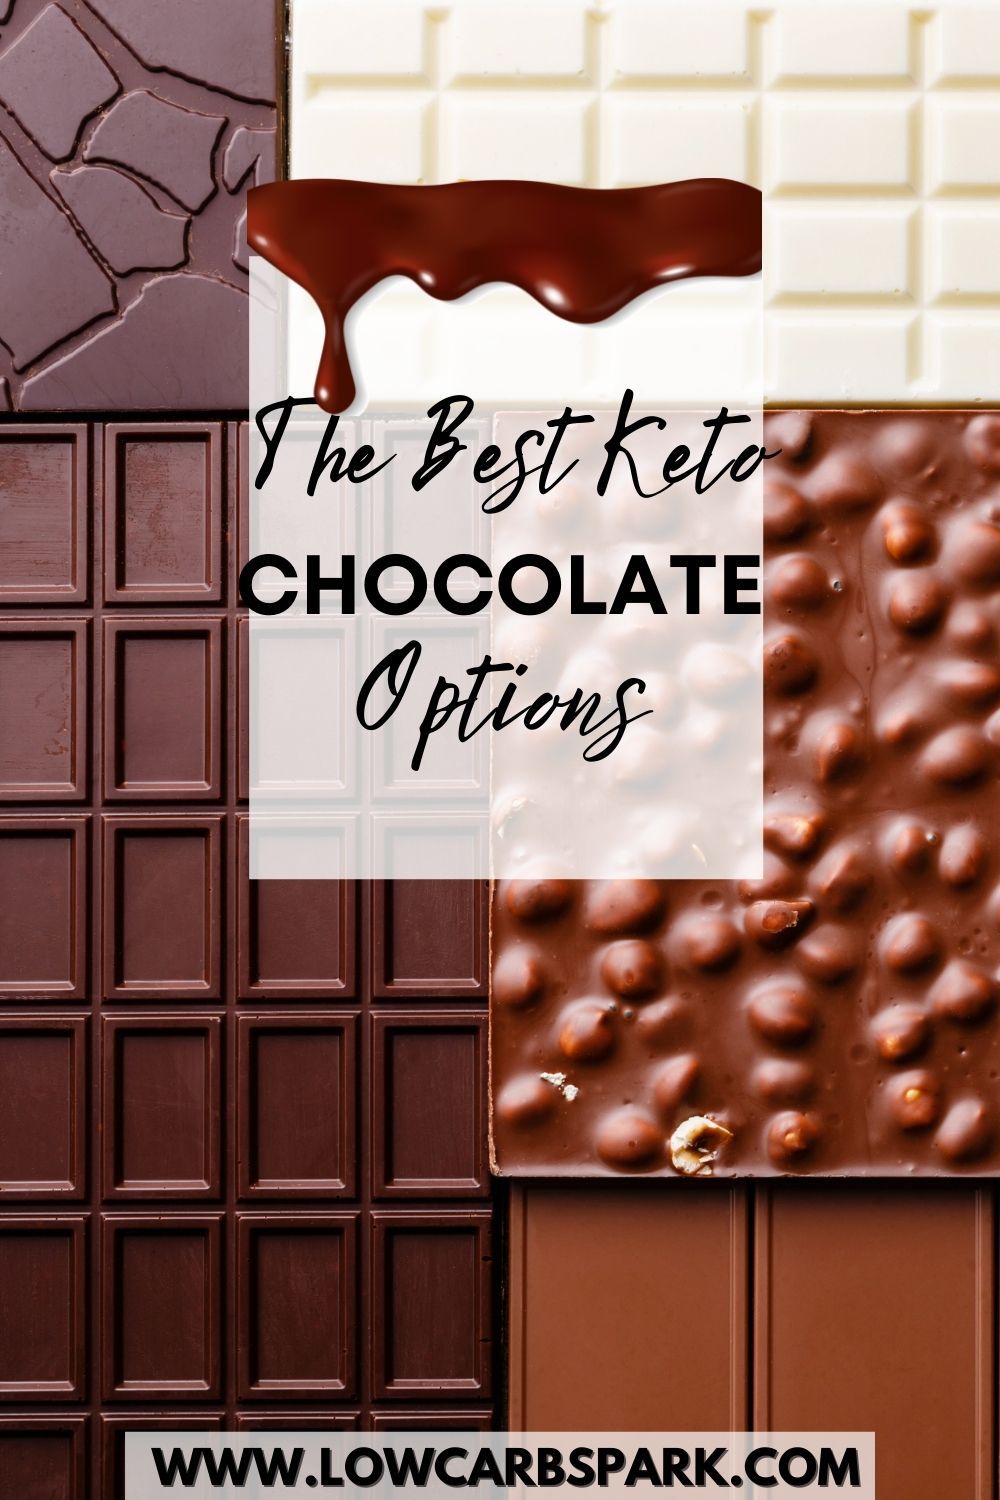 The Best Keto Chocolate - Top 10+ Low Carb Options